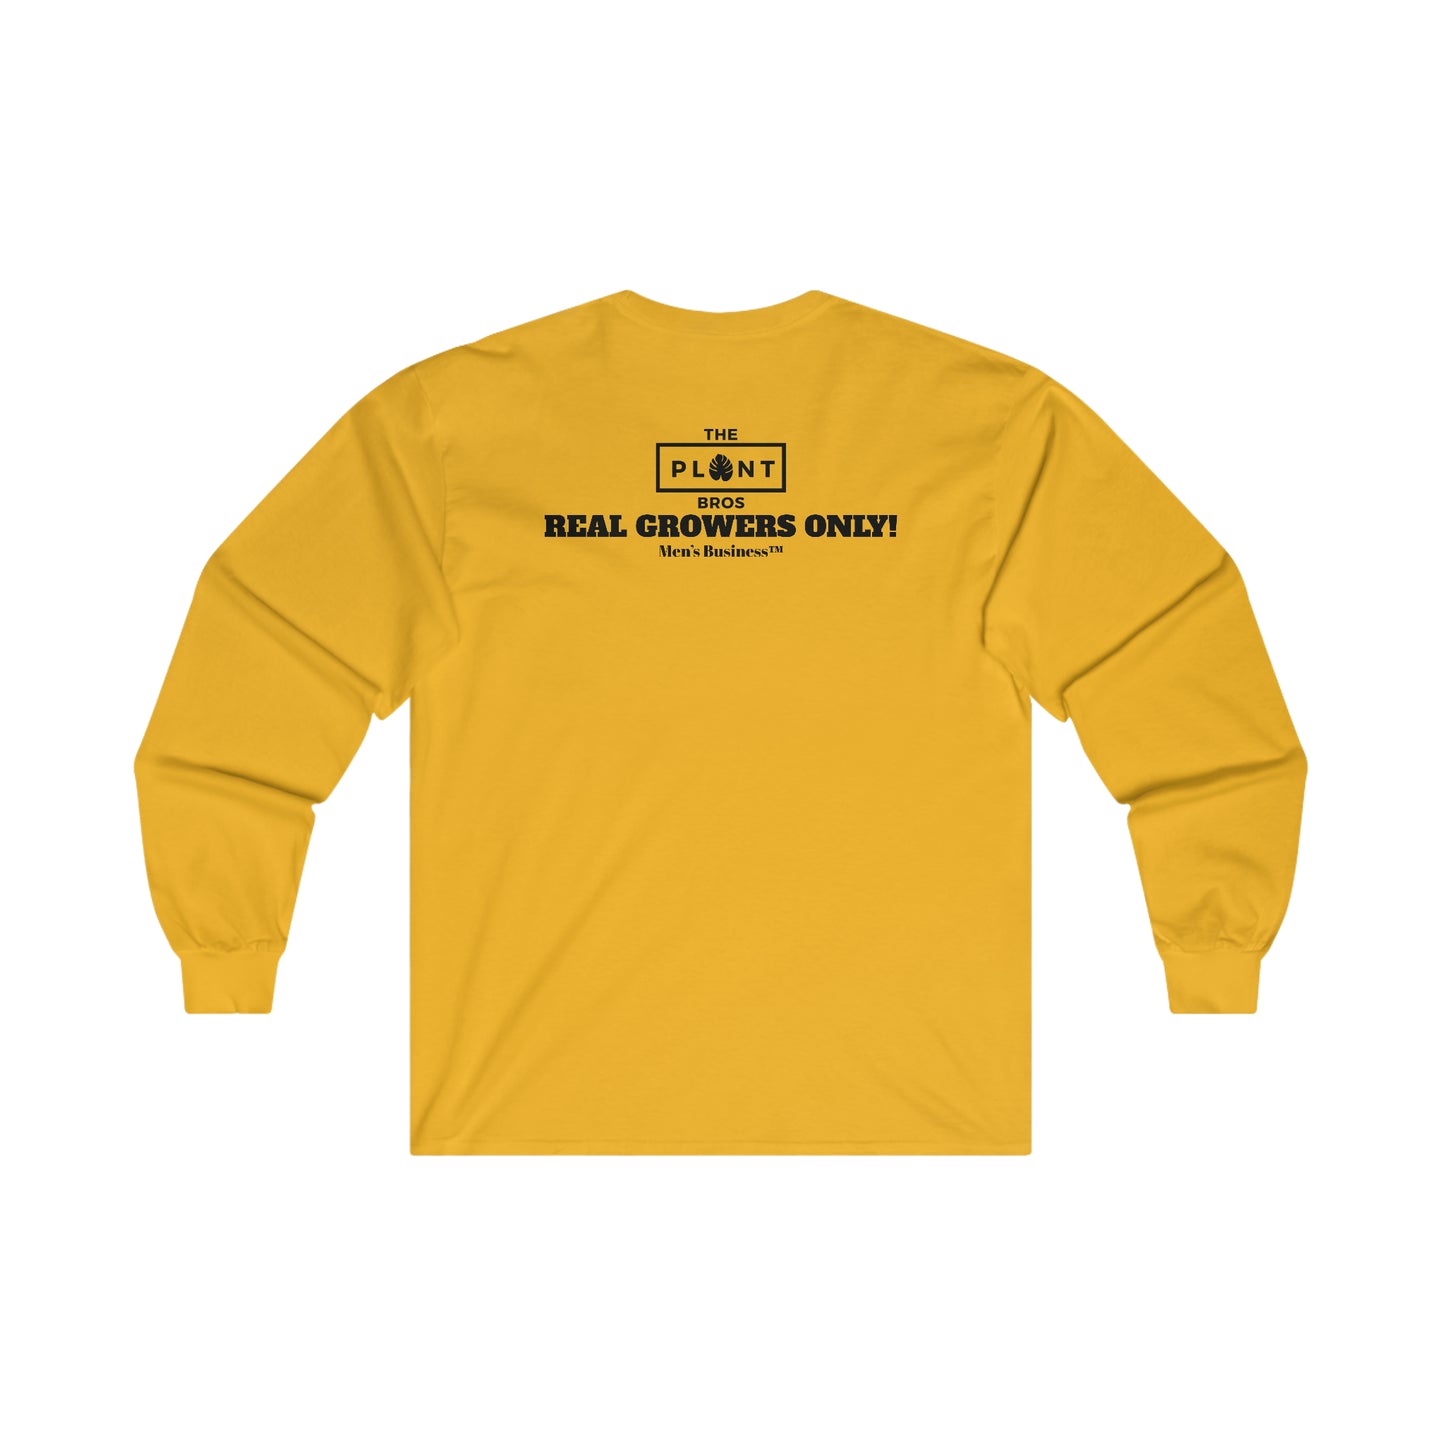 Black "Real Growers Only!" Long Sleeve Tee